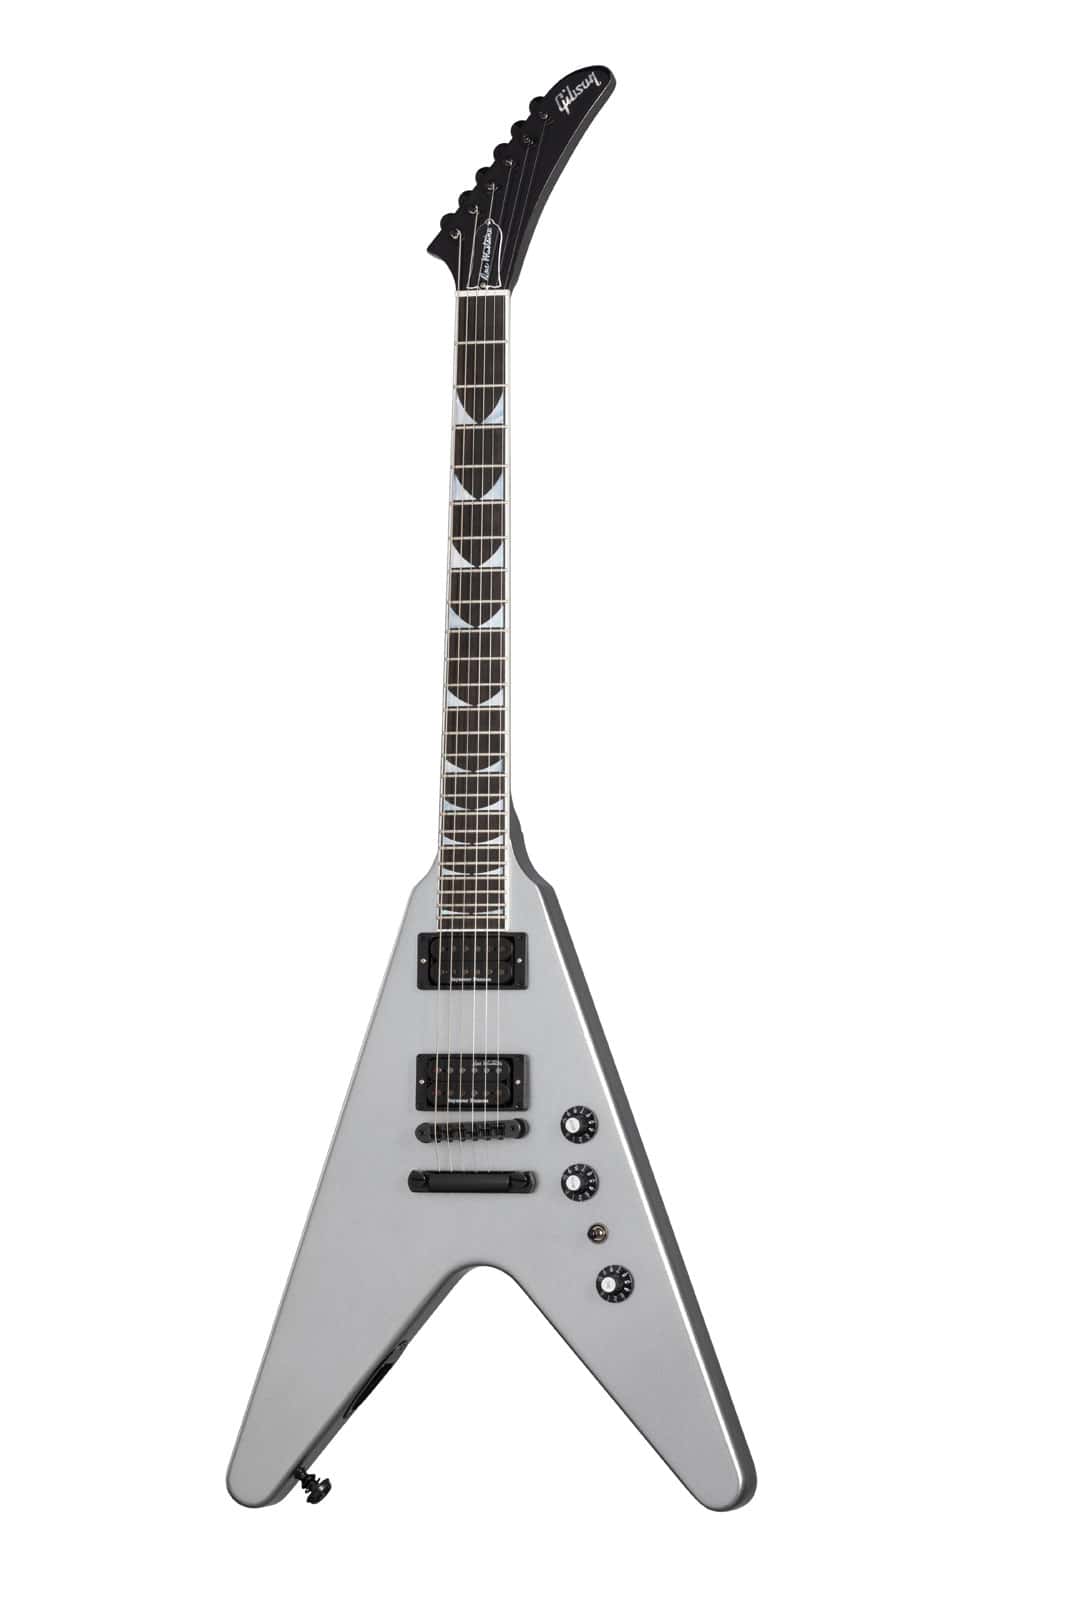 GIBSON USA FLYING V ARTIST DAVE MUSTAINE EXP SILVER METALLIC 